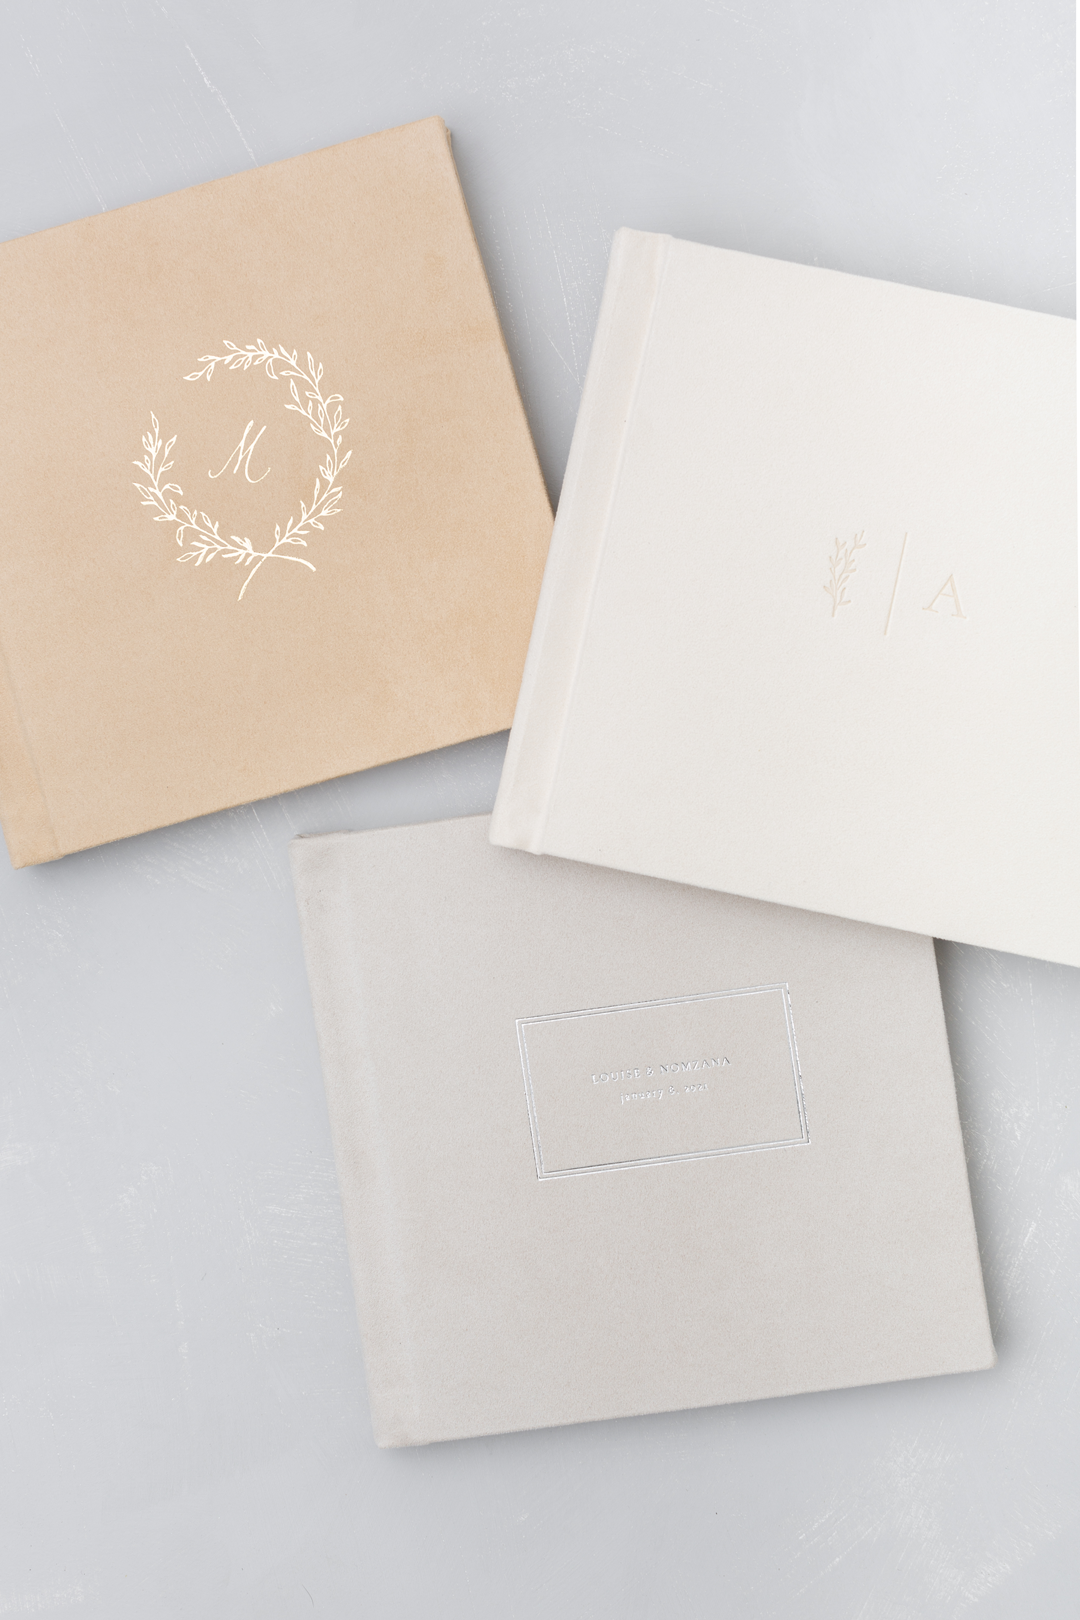 LaShay and Light Wedding Photography Albums blue linen